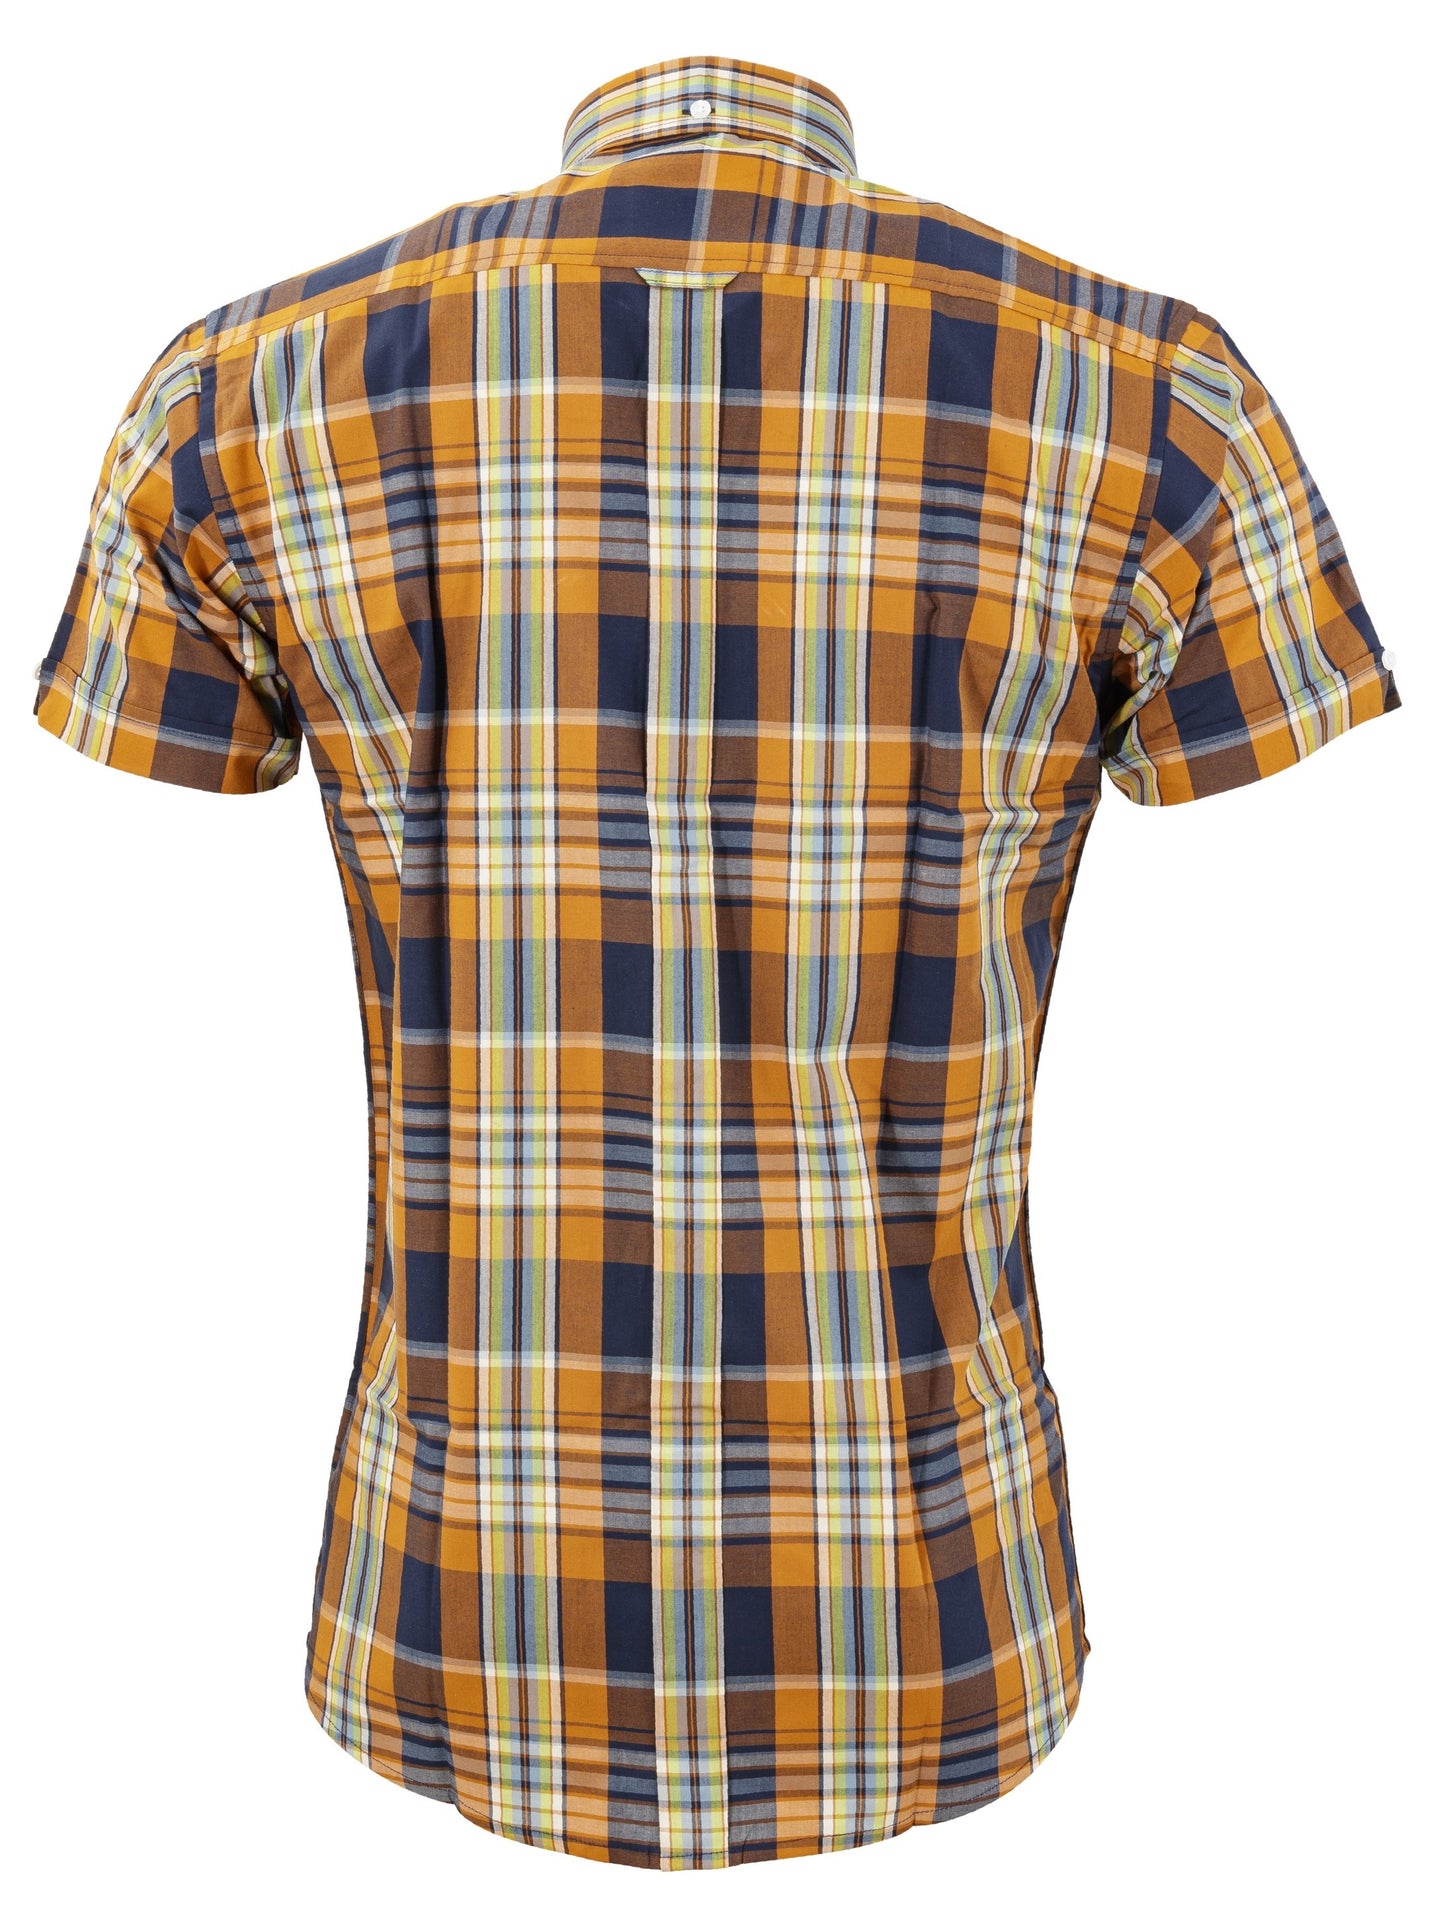 Relco Mens Orange Check Short Sleeved Vintage/Retro Button Down Shirts